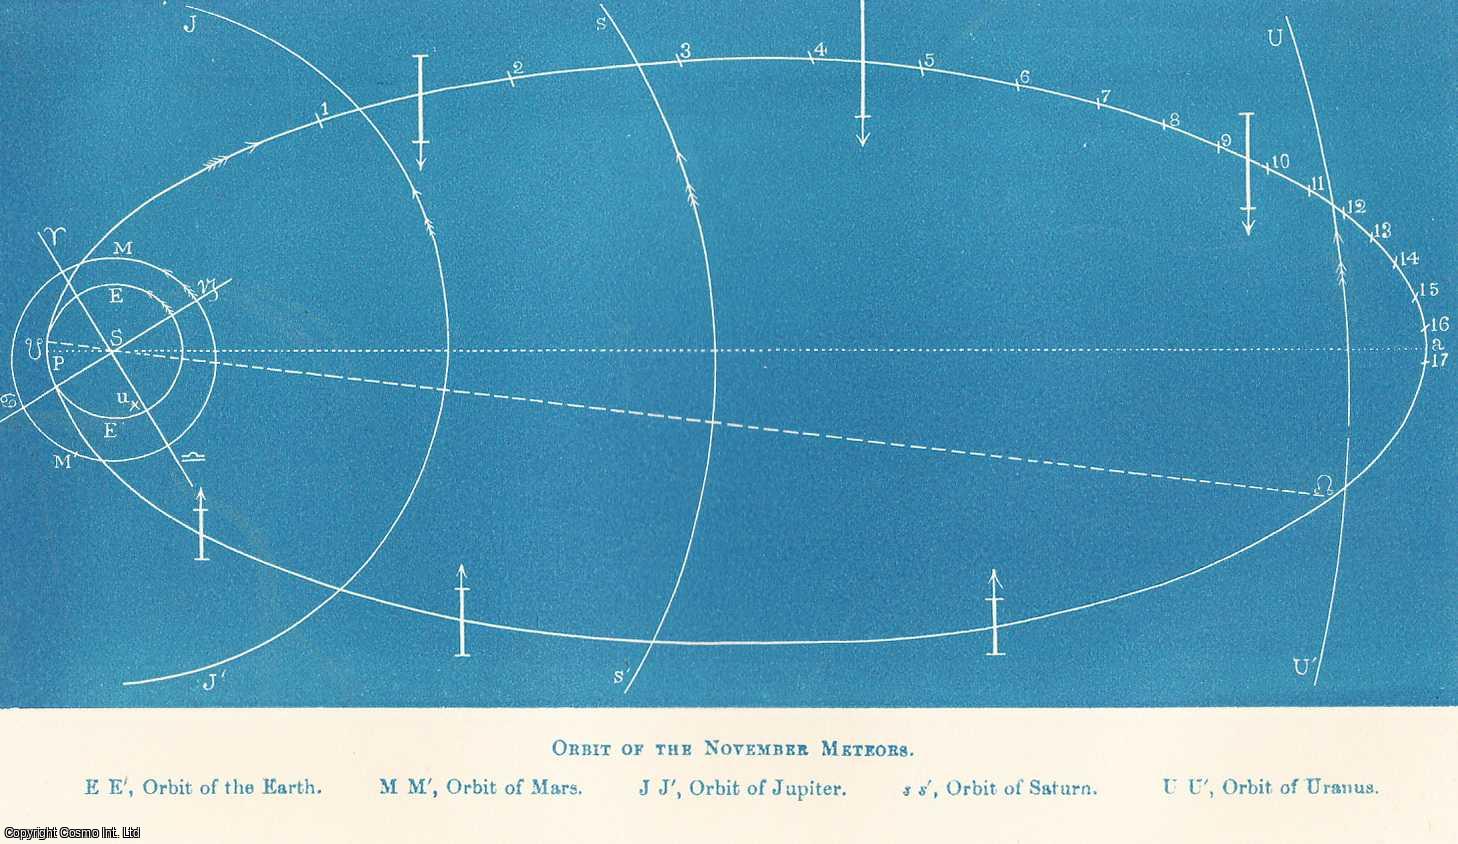 R.A. Proctor, B.A., F.R.A.S. - The November Shooting-stars. An uncommon original article from the Student and Intellectual Observer of Science Literature & Art, 1869.